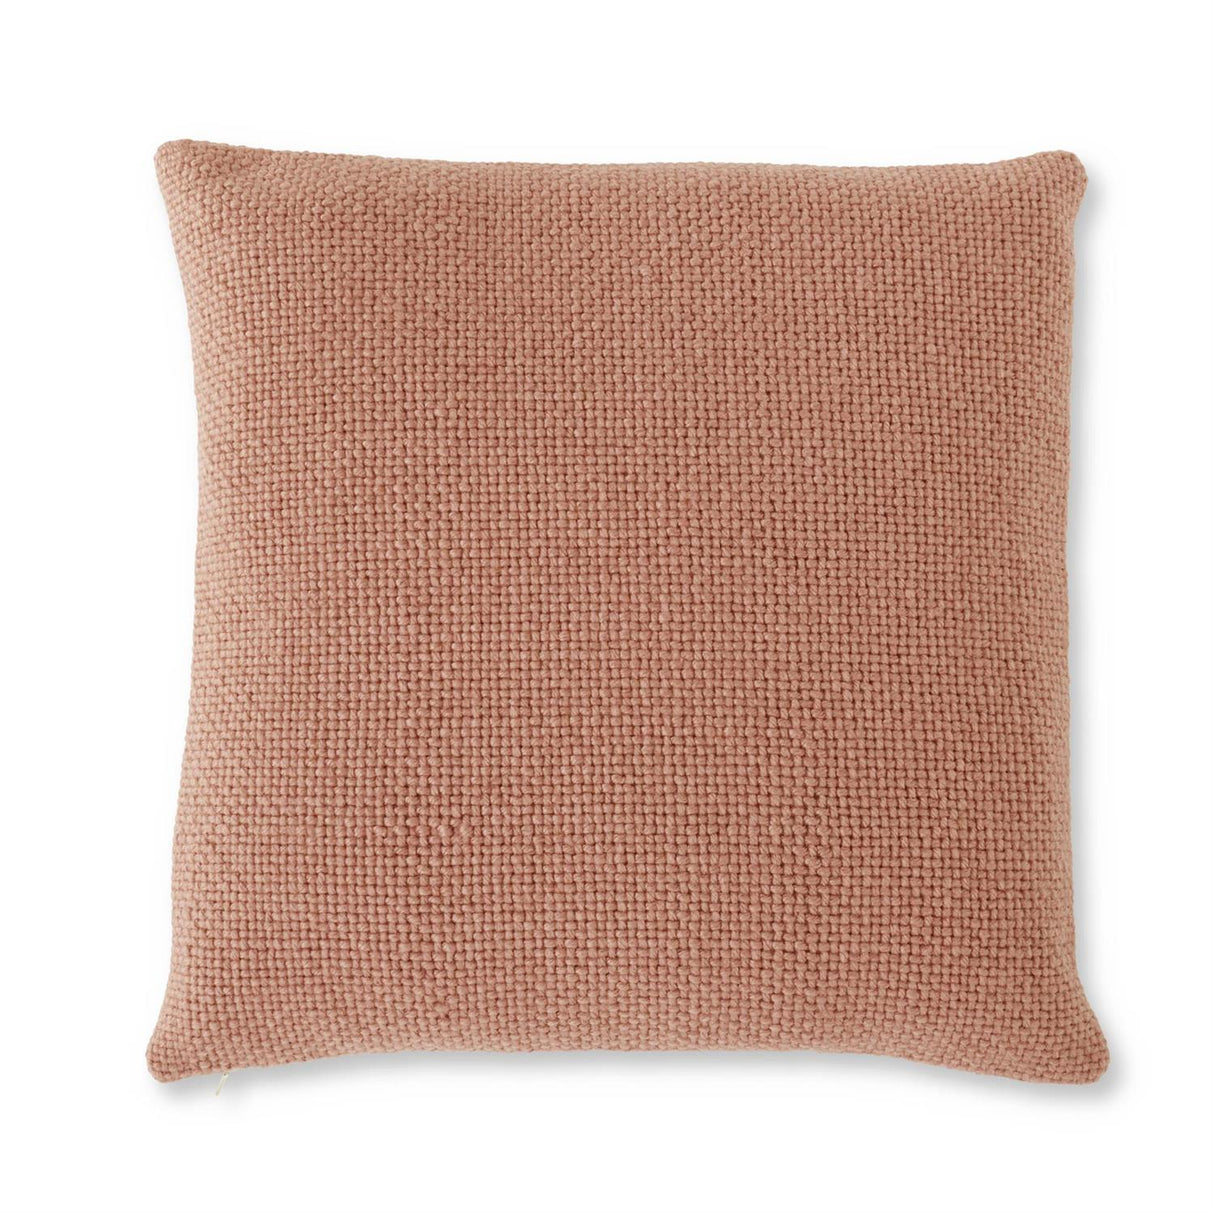 Square Coral Woven Pillow